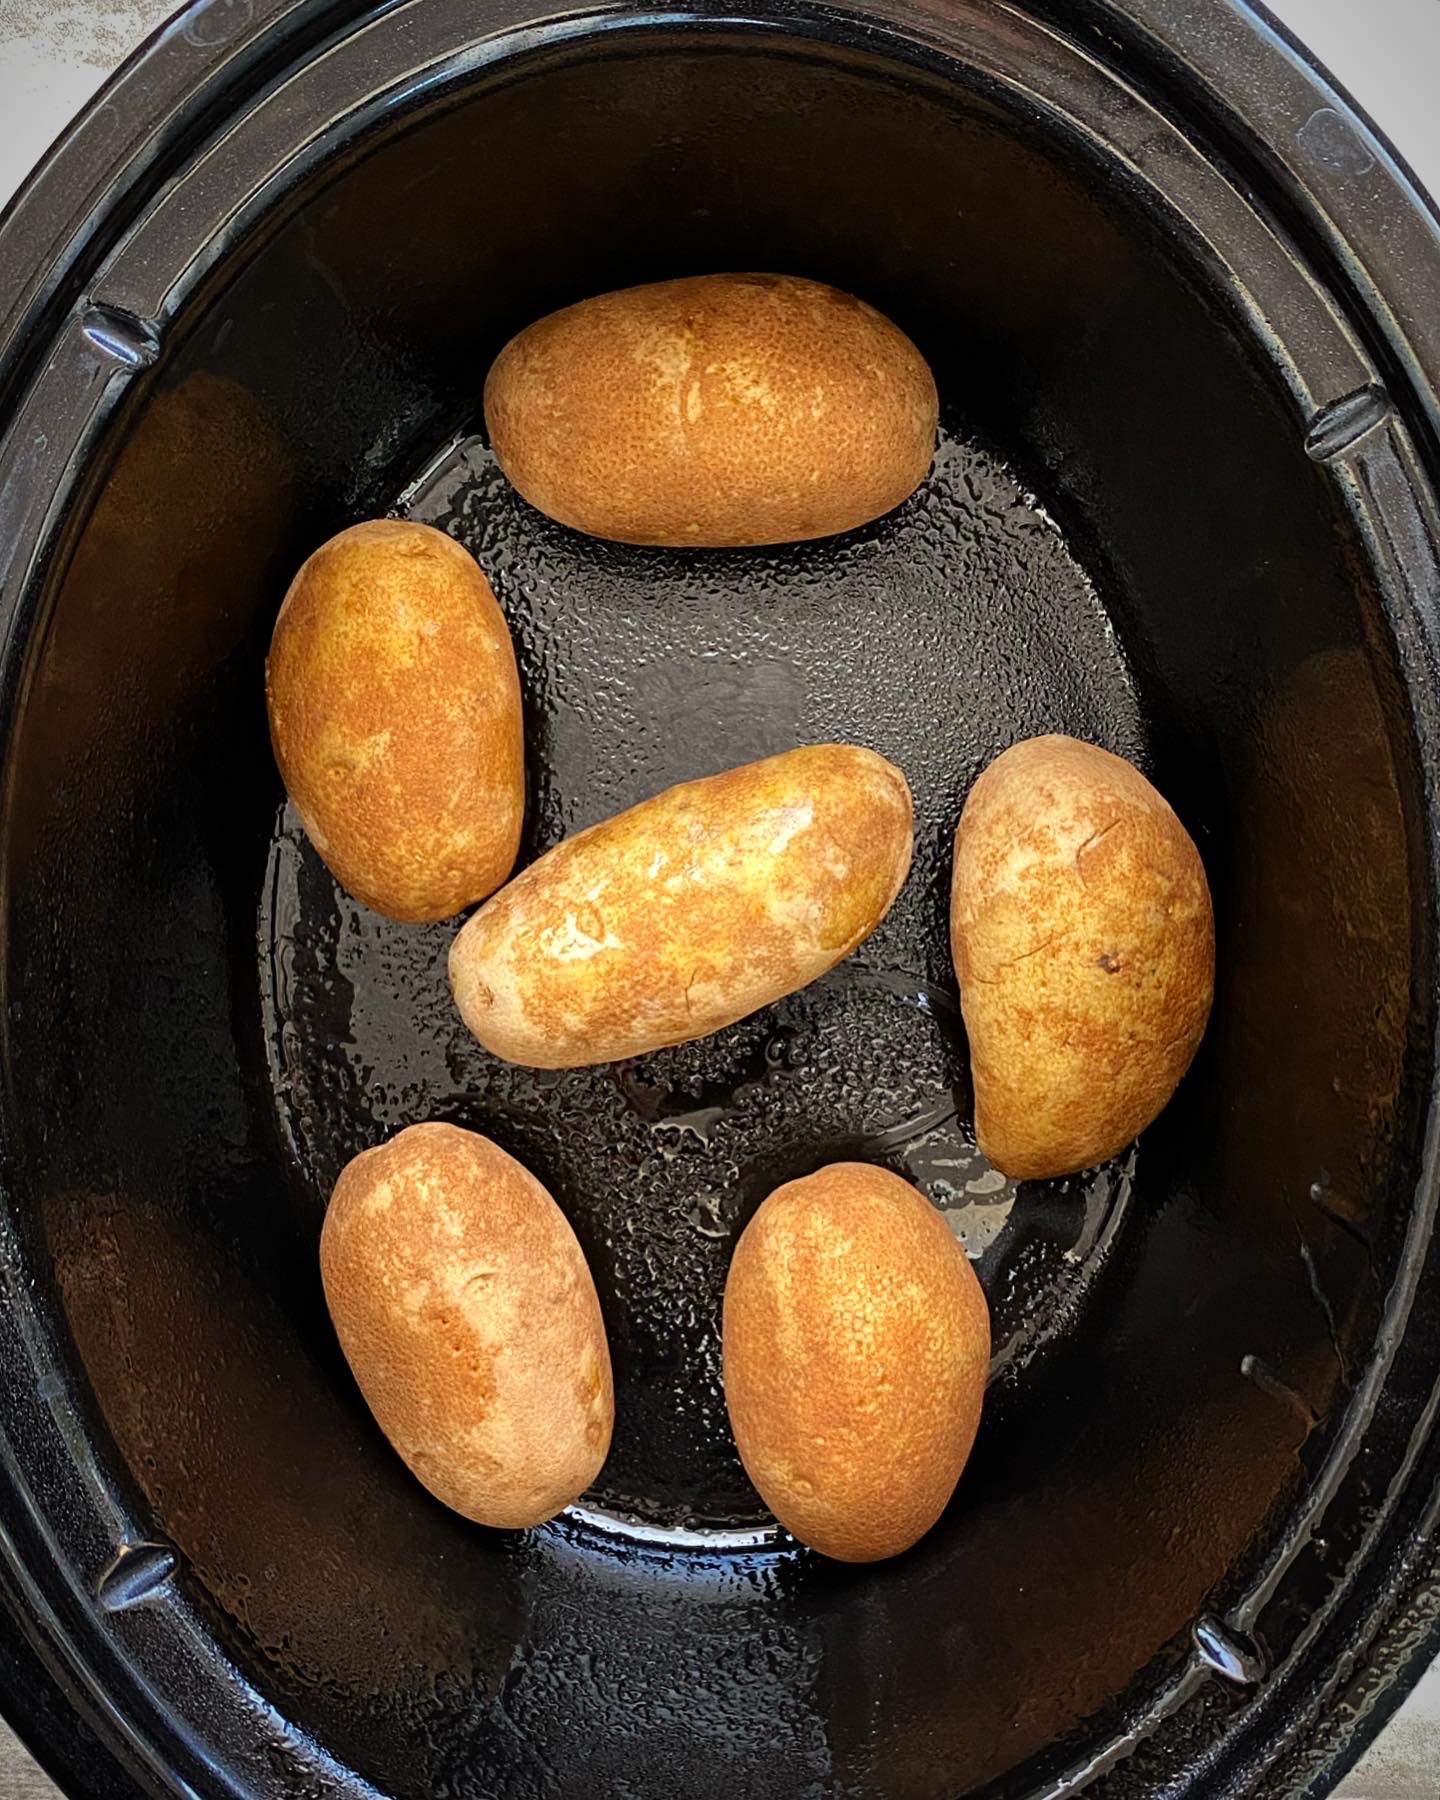 overhead shot of 6 russet potatoes in a black slow cooker